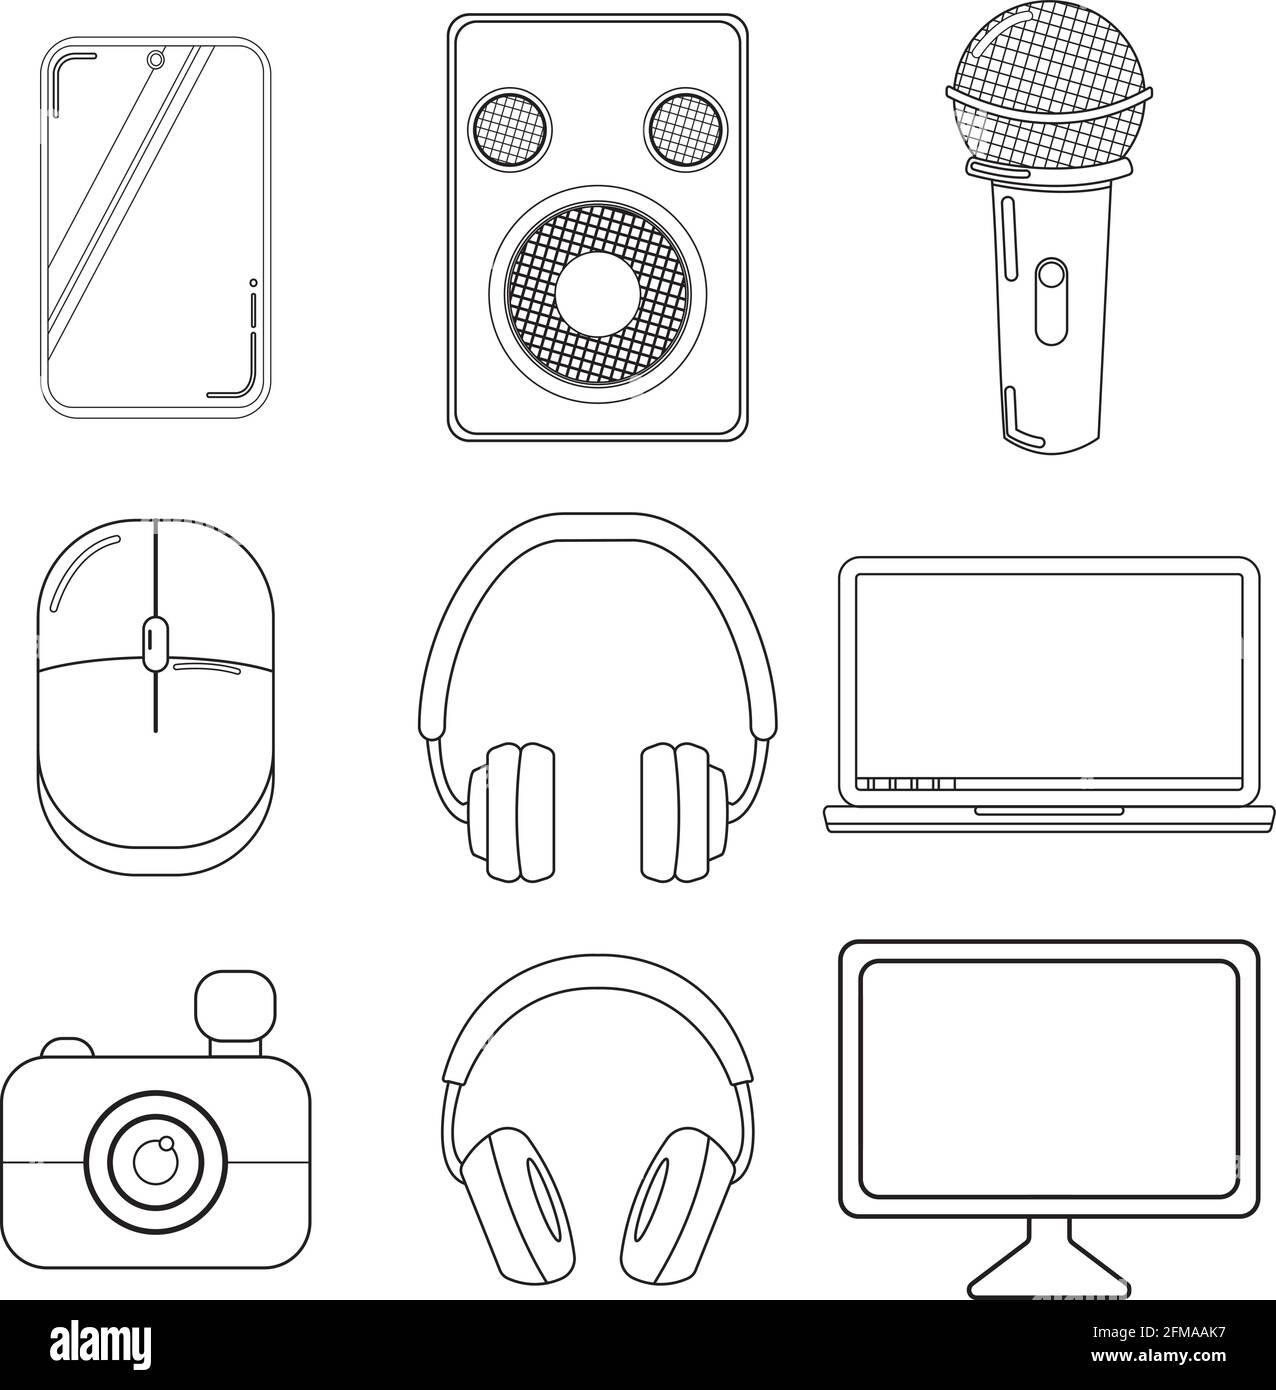 Set digital devices icons drawn with outlines only, including headphones, headset, monitor, laptop, camera, phone, speakers, microphone and a mouse. Stock Vector